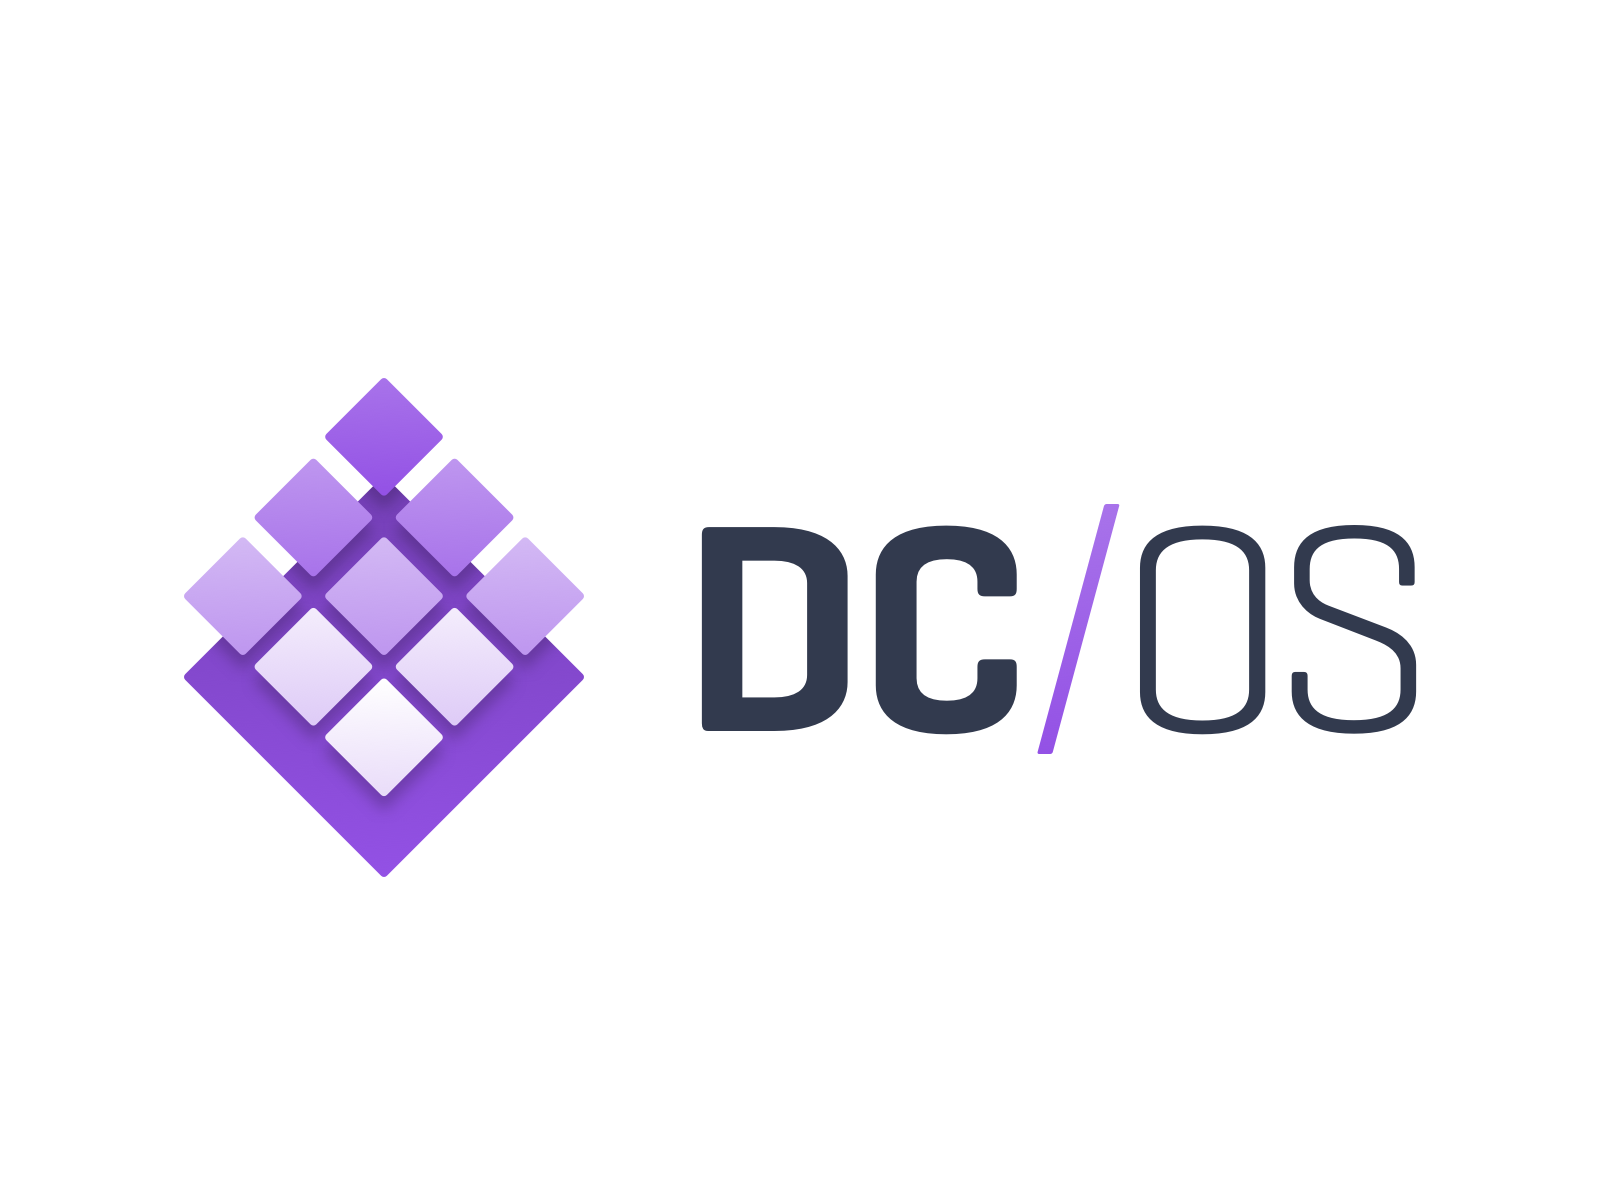 The Mesosphere guide to getting started with DC/OS